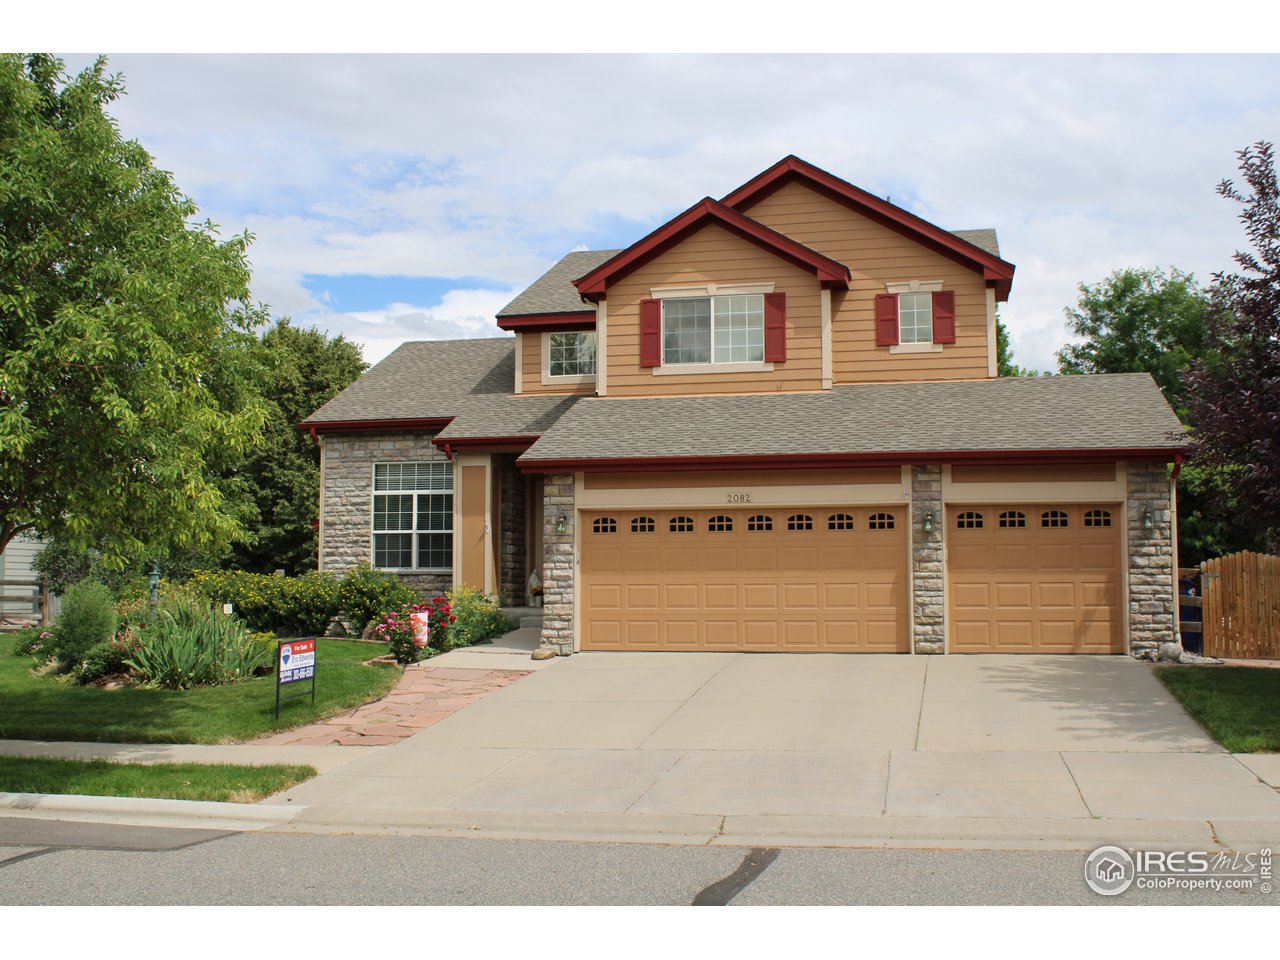 2082 Madison Dr., Erie, CO 80516, backs to open space.